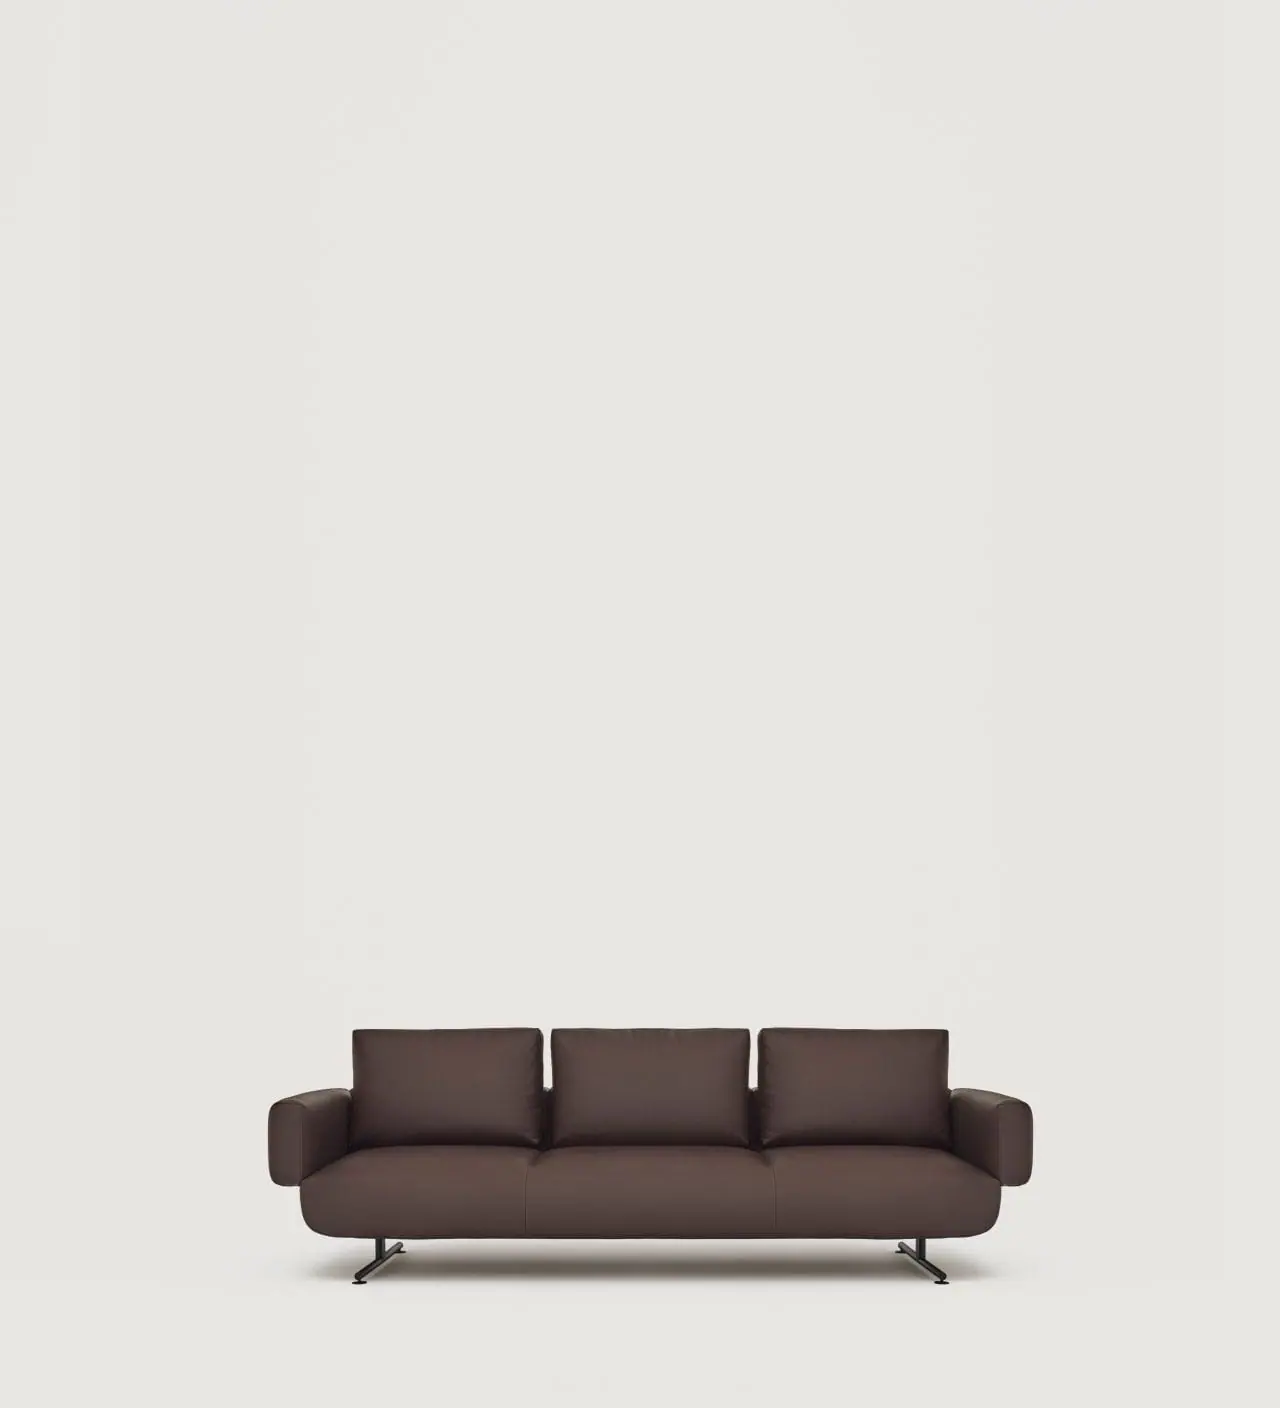 capdell-nodal-sofa-11